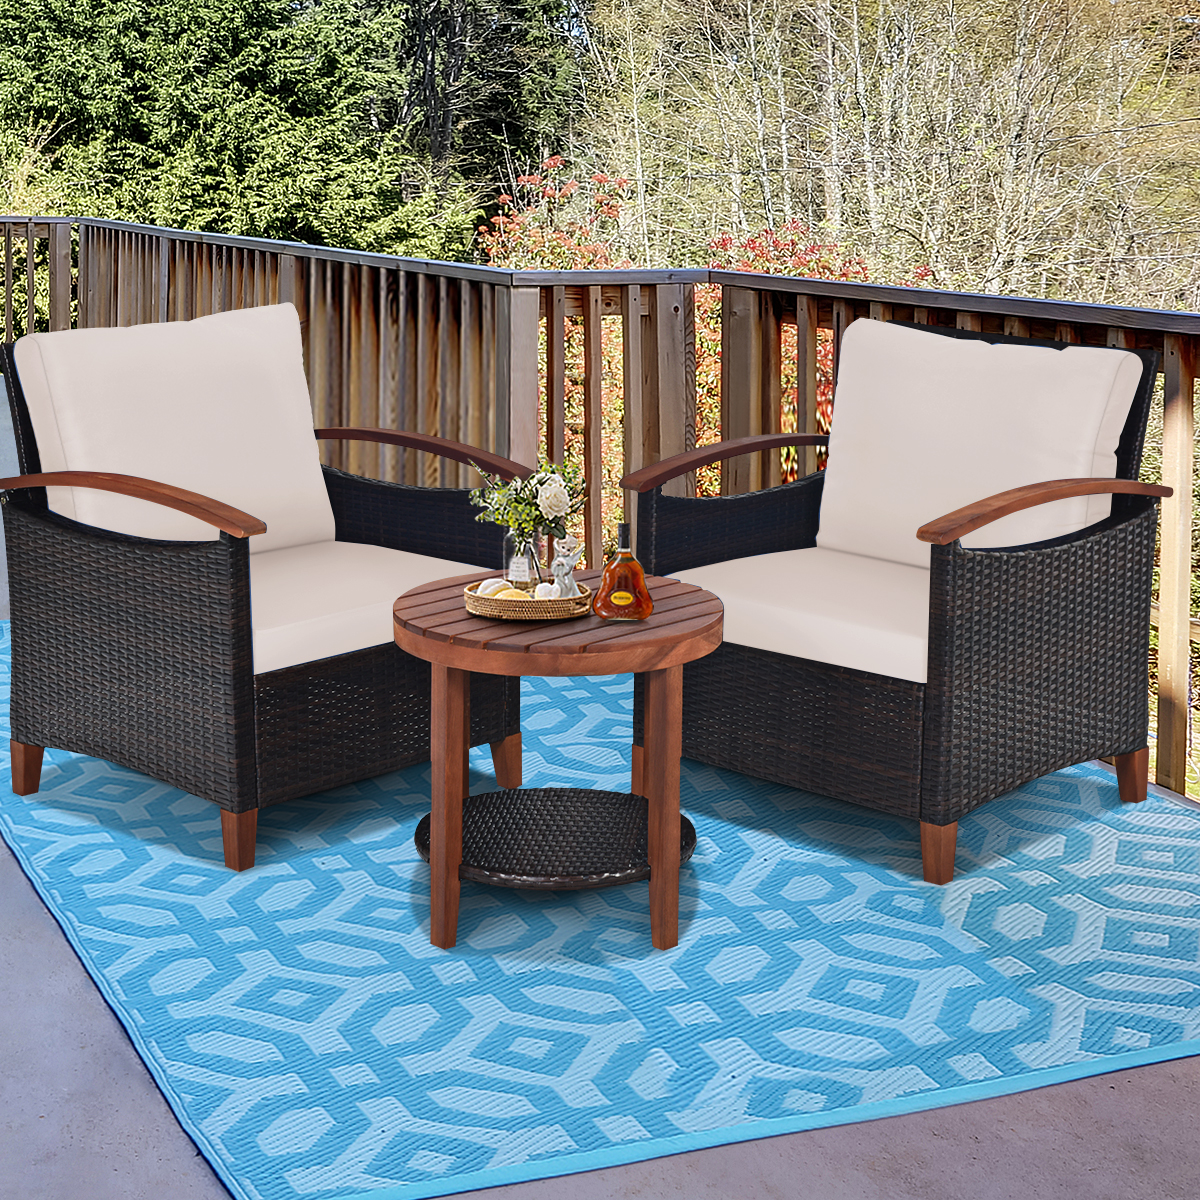 Patiojoy 3-Piece Patio Rattan Bistro Set Acacia Wood Frame Sofa and Side Table Beige - image 3 of 6